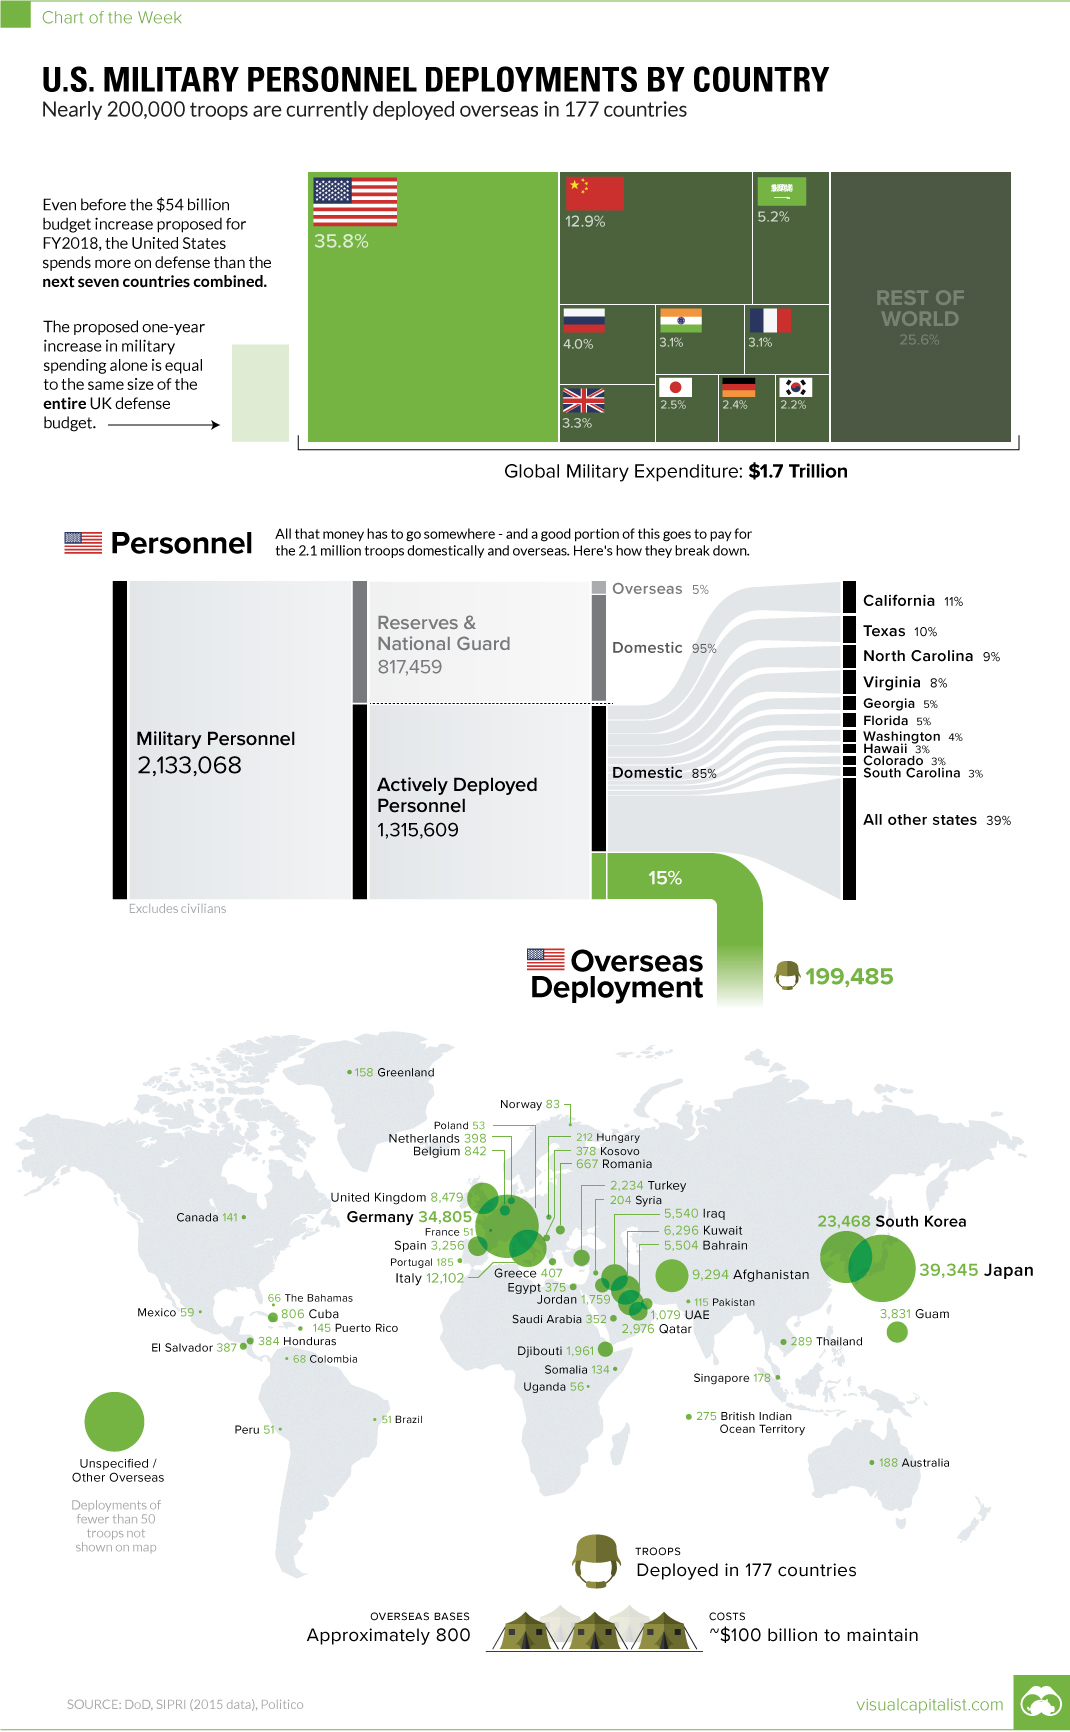 Chart: U.S. Military Personnel Deployments by Country